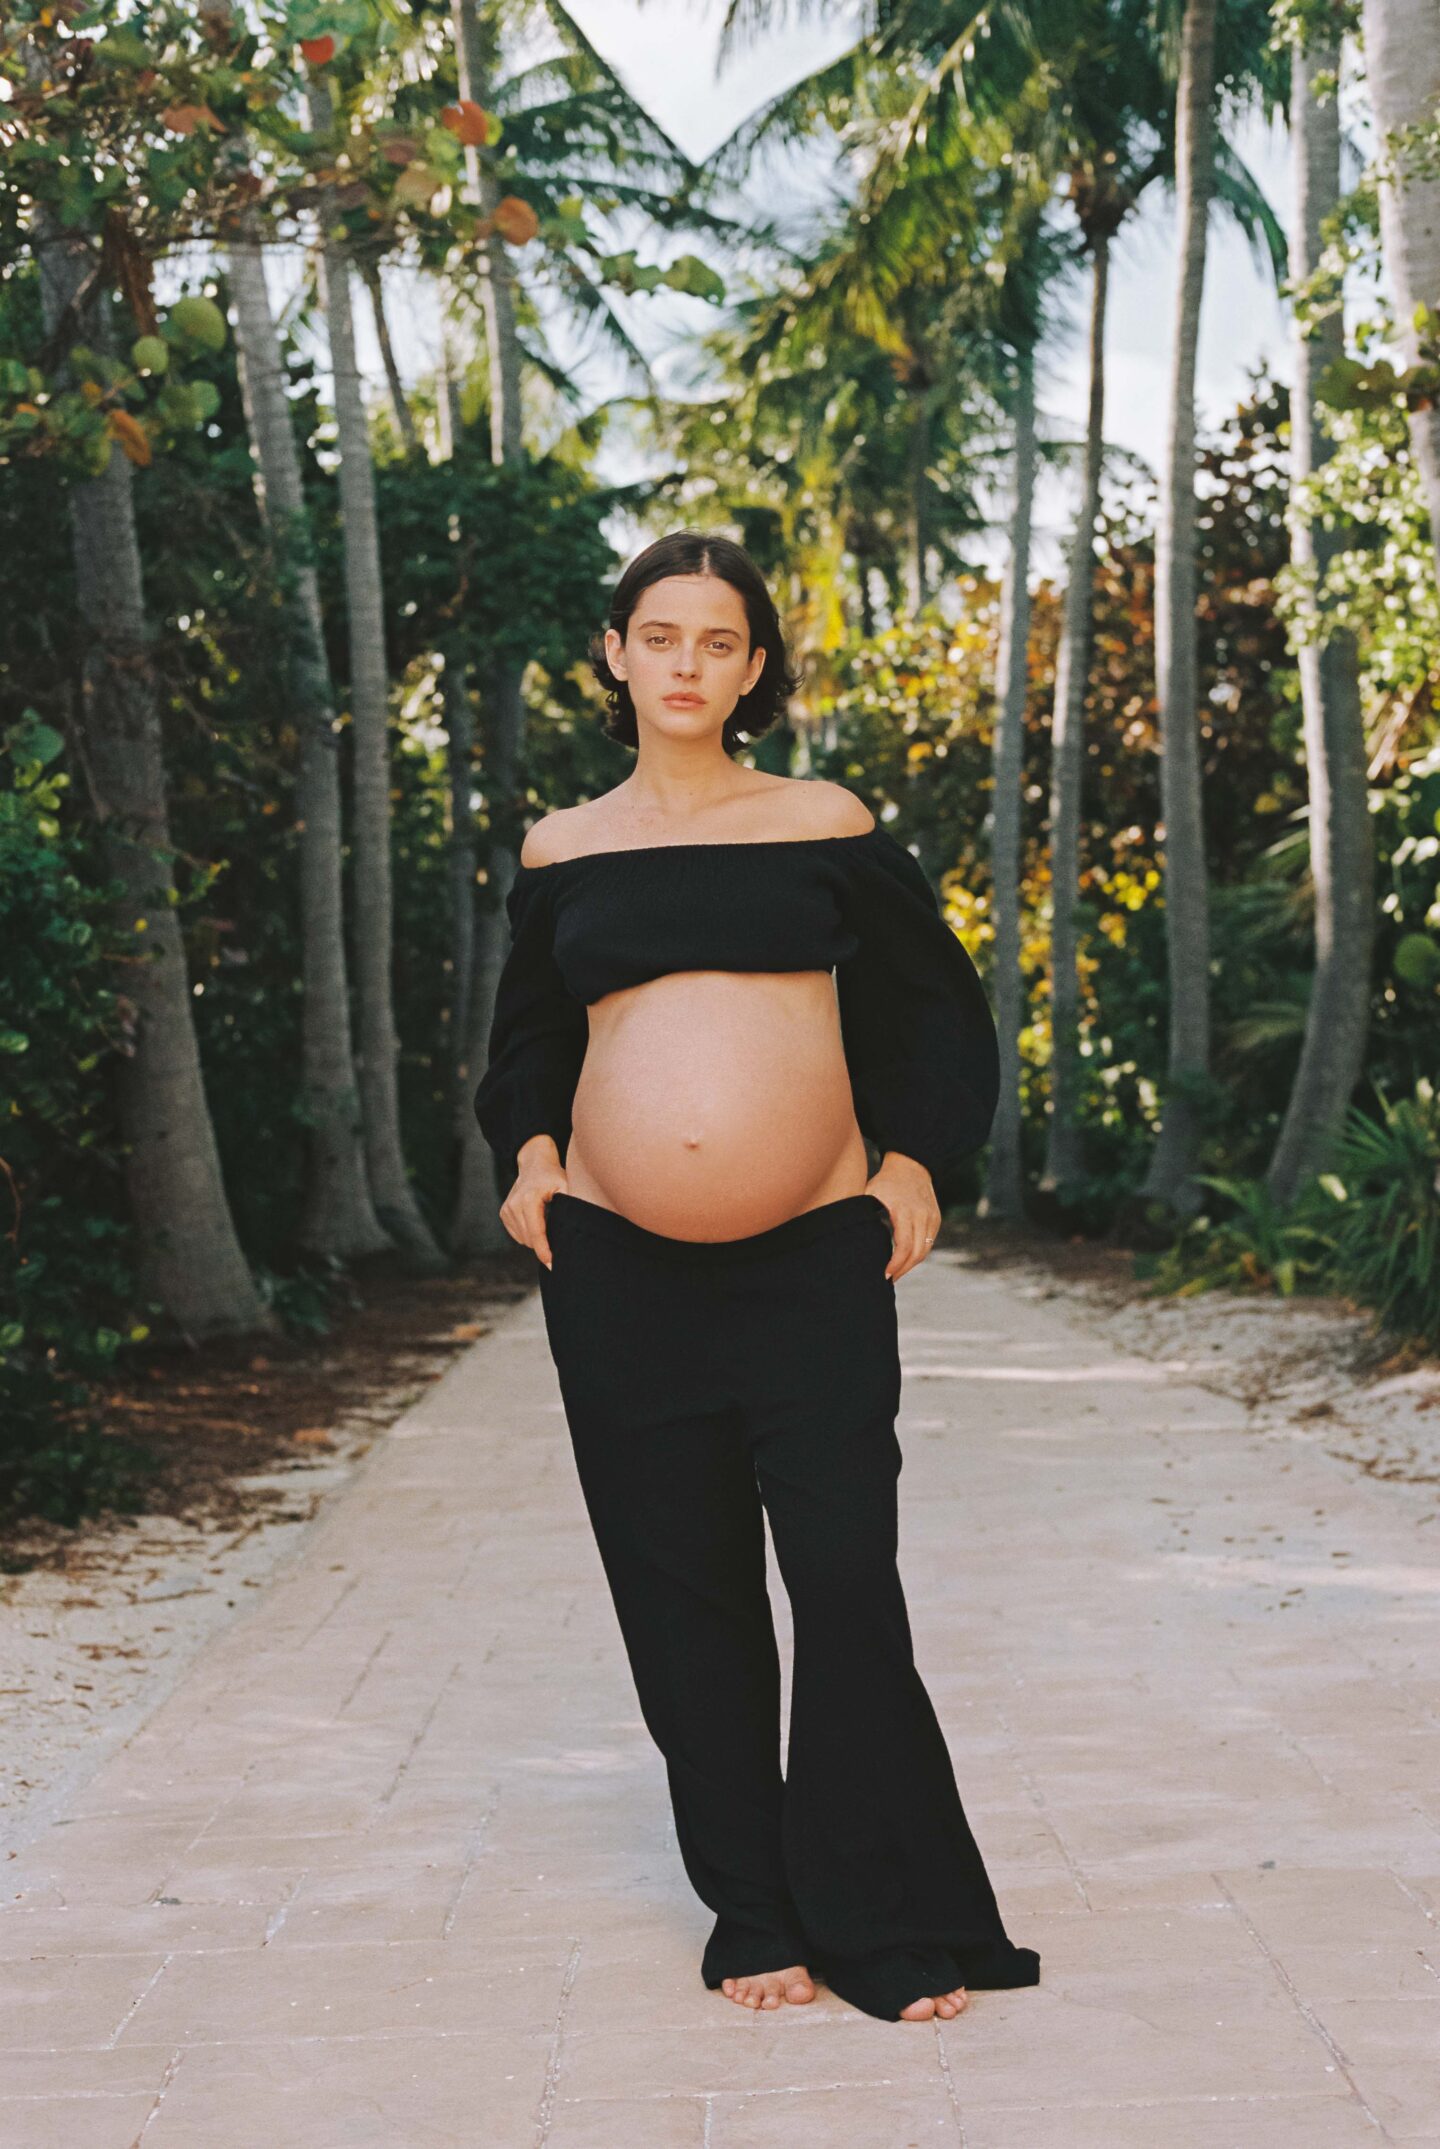 pregnant woman wearing a crop top in a tropical location